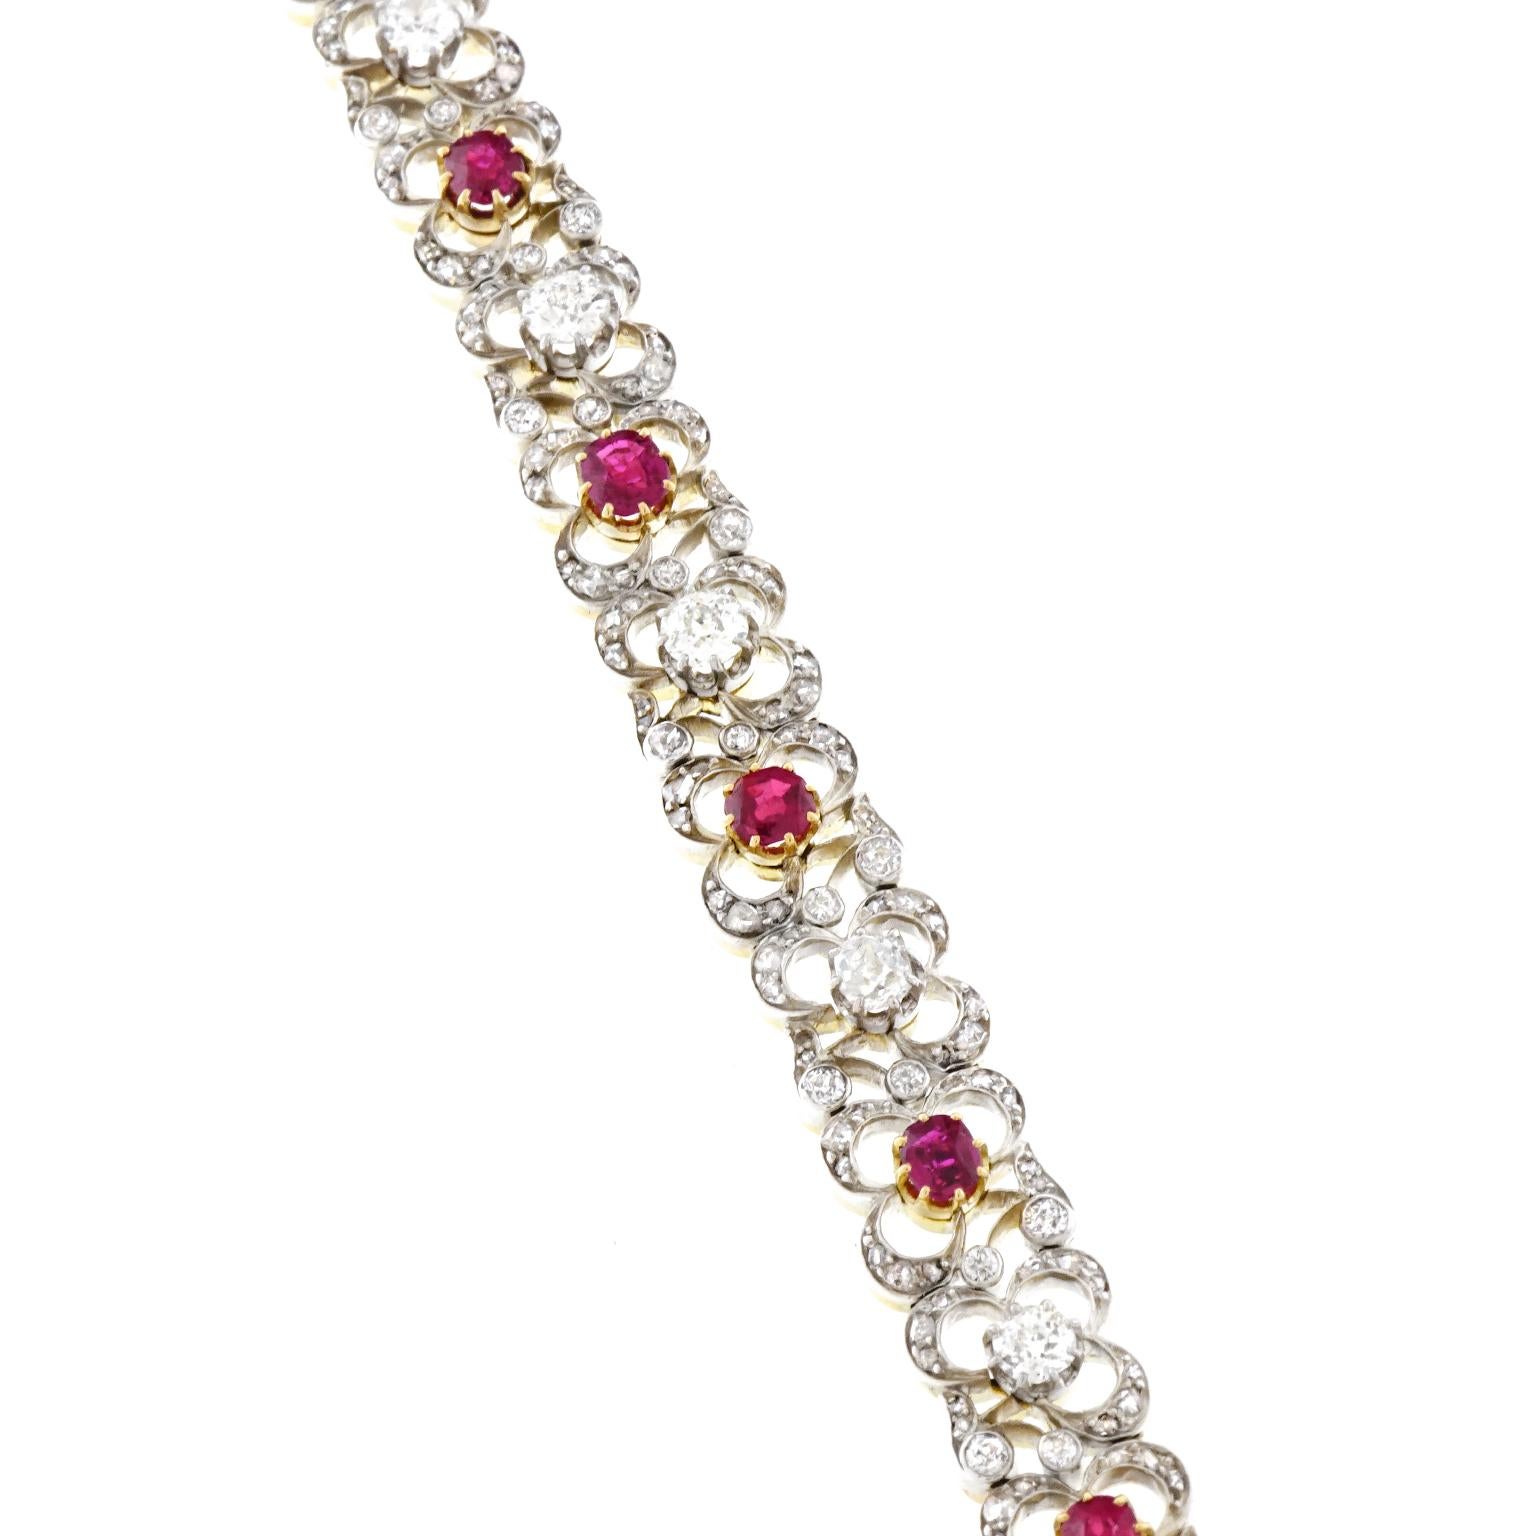 Women's Antique Silver over Gold Diamond and Ruby Bracelet